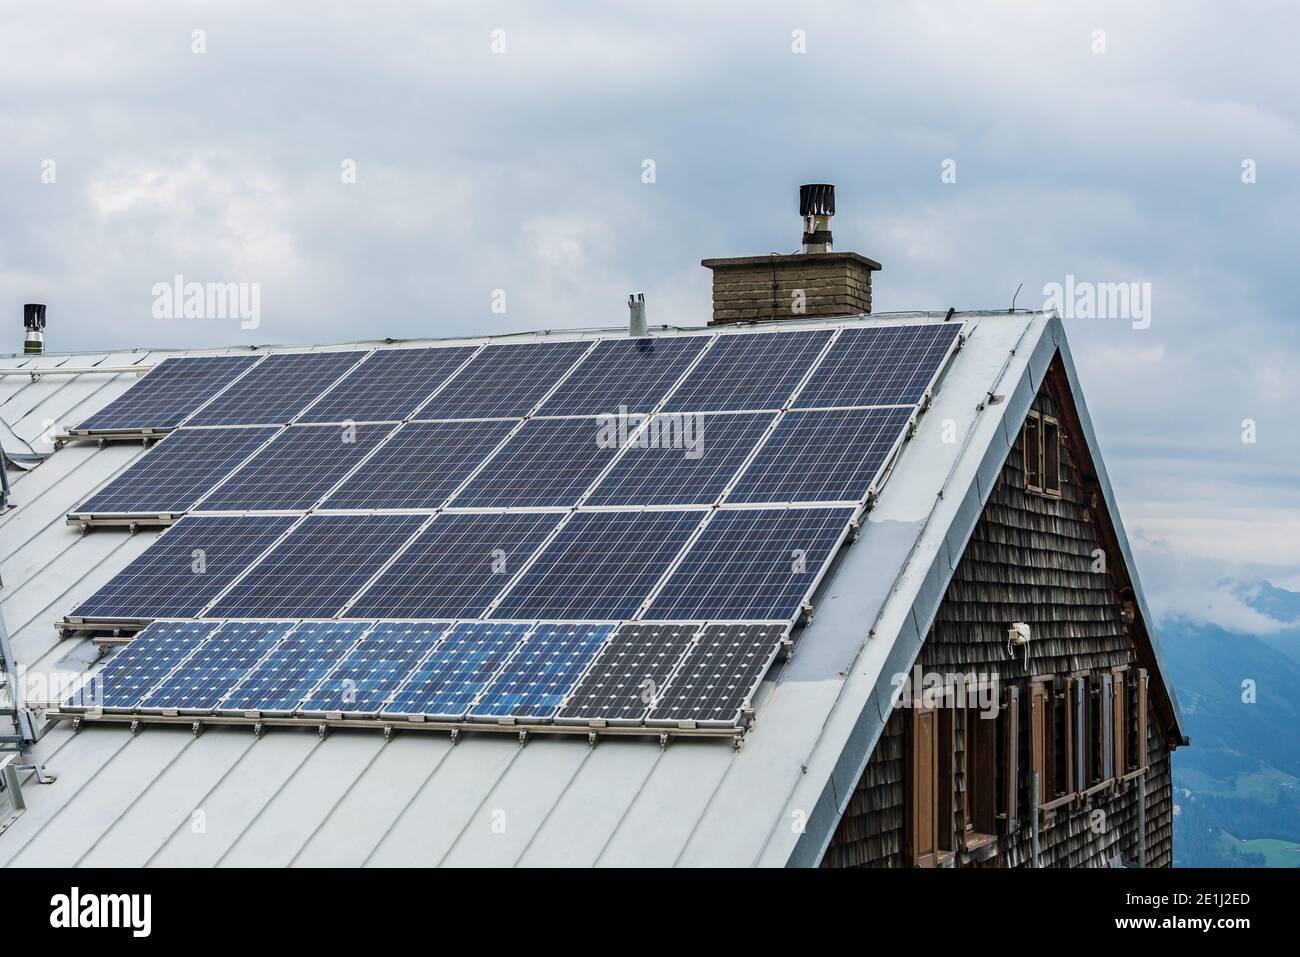 Solar photovoltaic panels PV on a house roof. Electricity from the sun during winter. House with windows and chimney, mountains at the background. Stock Photo